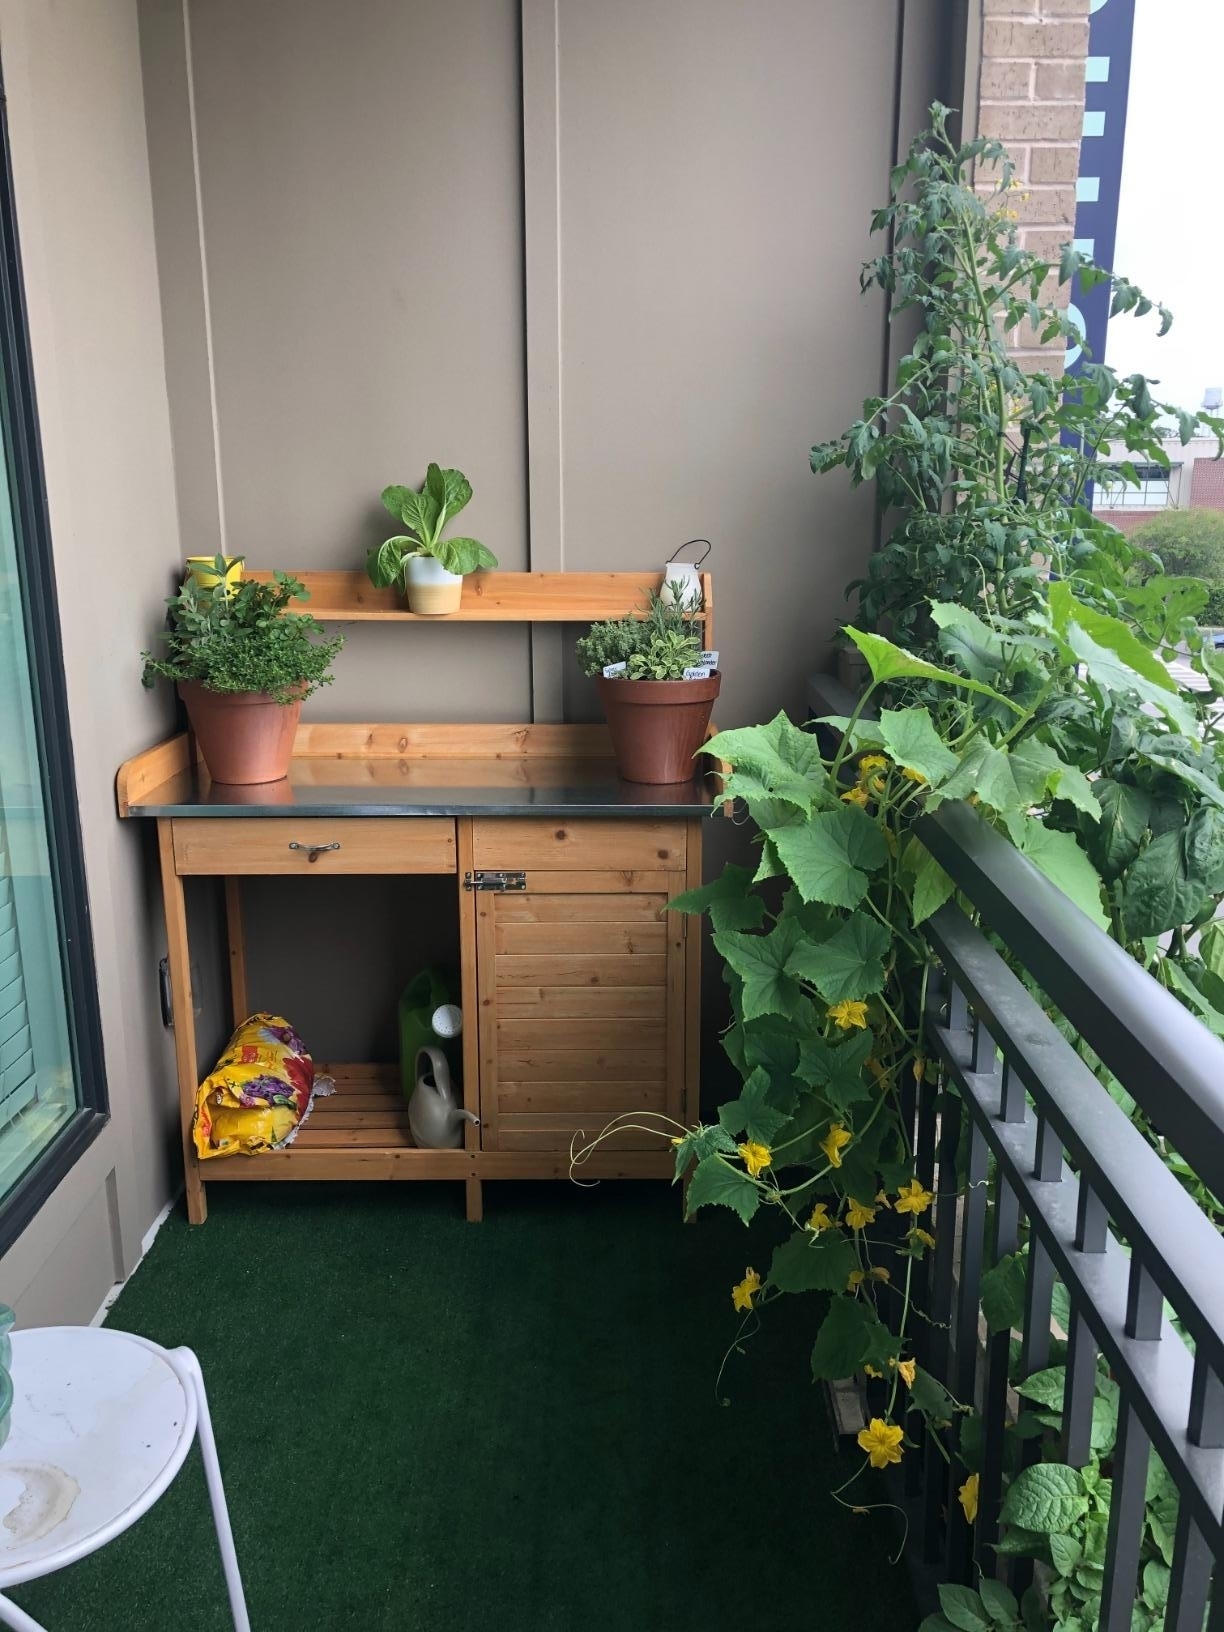 Wooden balcony plant station with herbs and blooming plants, artificial grass flooring, and gardening supplies